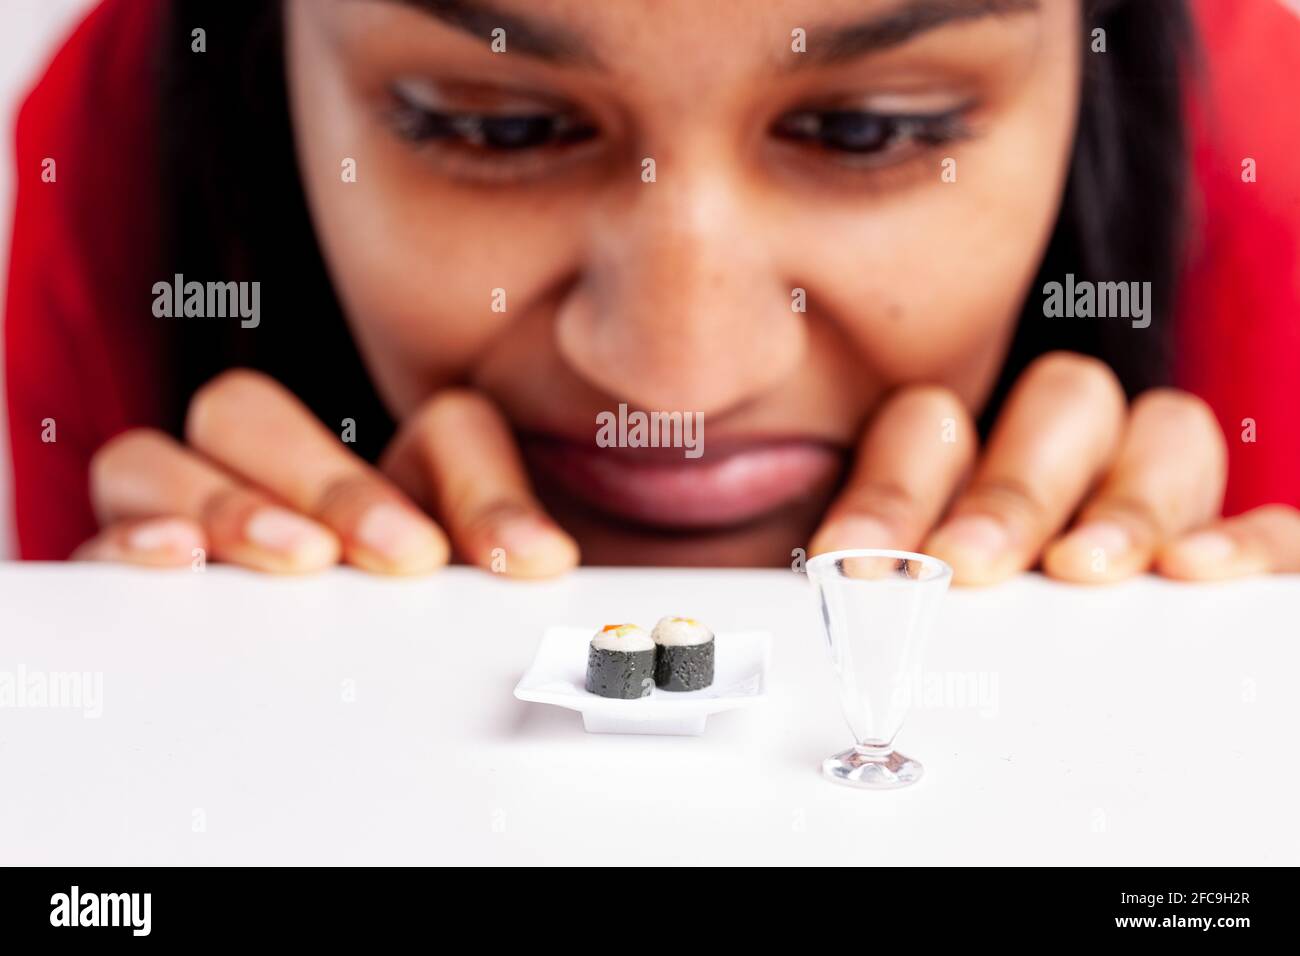 Young woman with an aversion to sushi in a fun concept using miniature food on a plate with her peering over the table grimacing and selective focus t Stock Photo